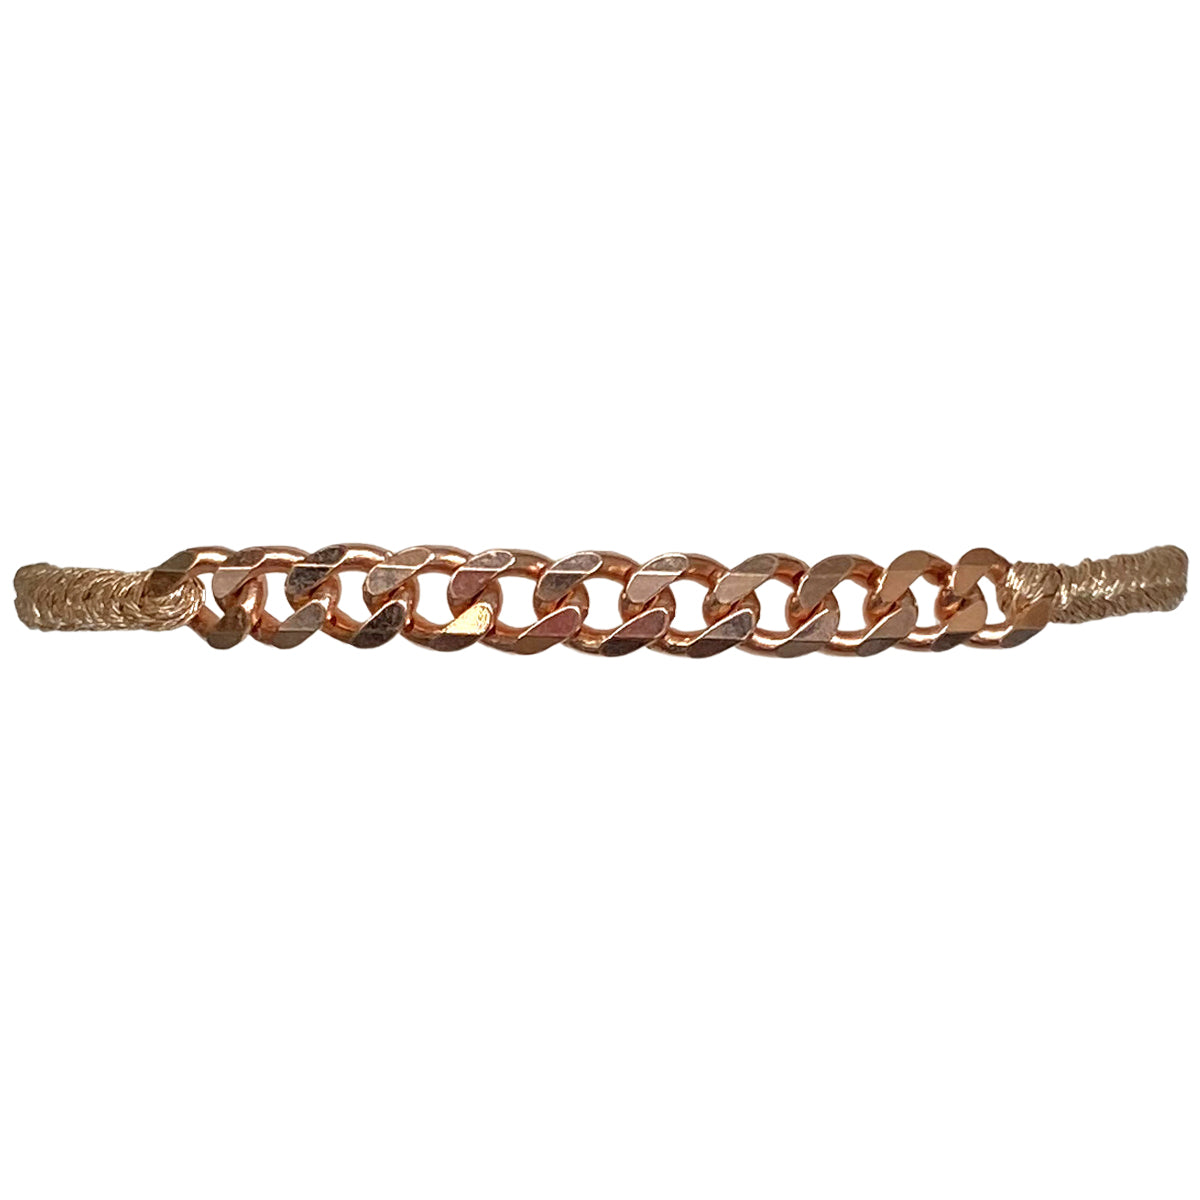 This delicate bracelet has been handwoven in Colombia by our team of master artisans using metallic threads. It features a strap in copper tones with a central chain in 24 rose gold vermeil. This femenine design looks great worn solo or stacked with other pieces.  Details:      24 rose gold vermeil centerpiece     Metallic threads     Adjustable handwoven bracelet     Width 5mm